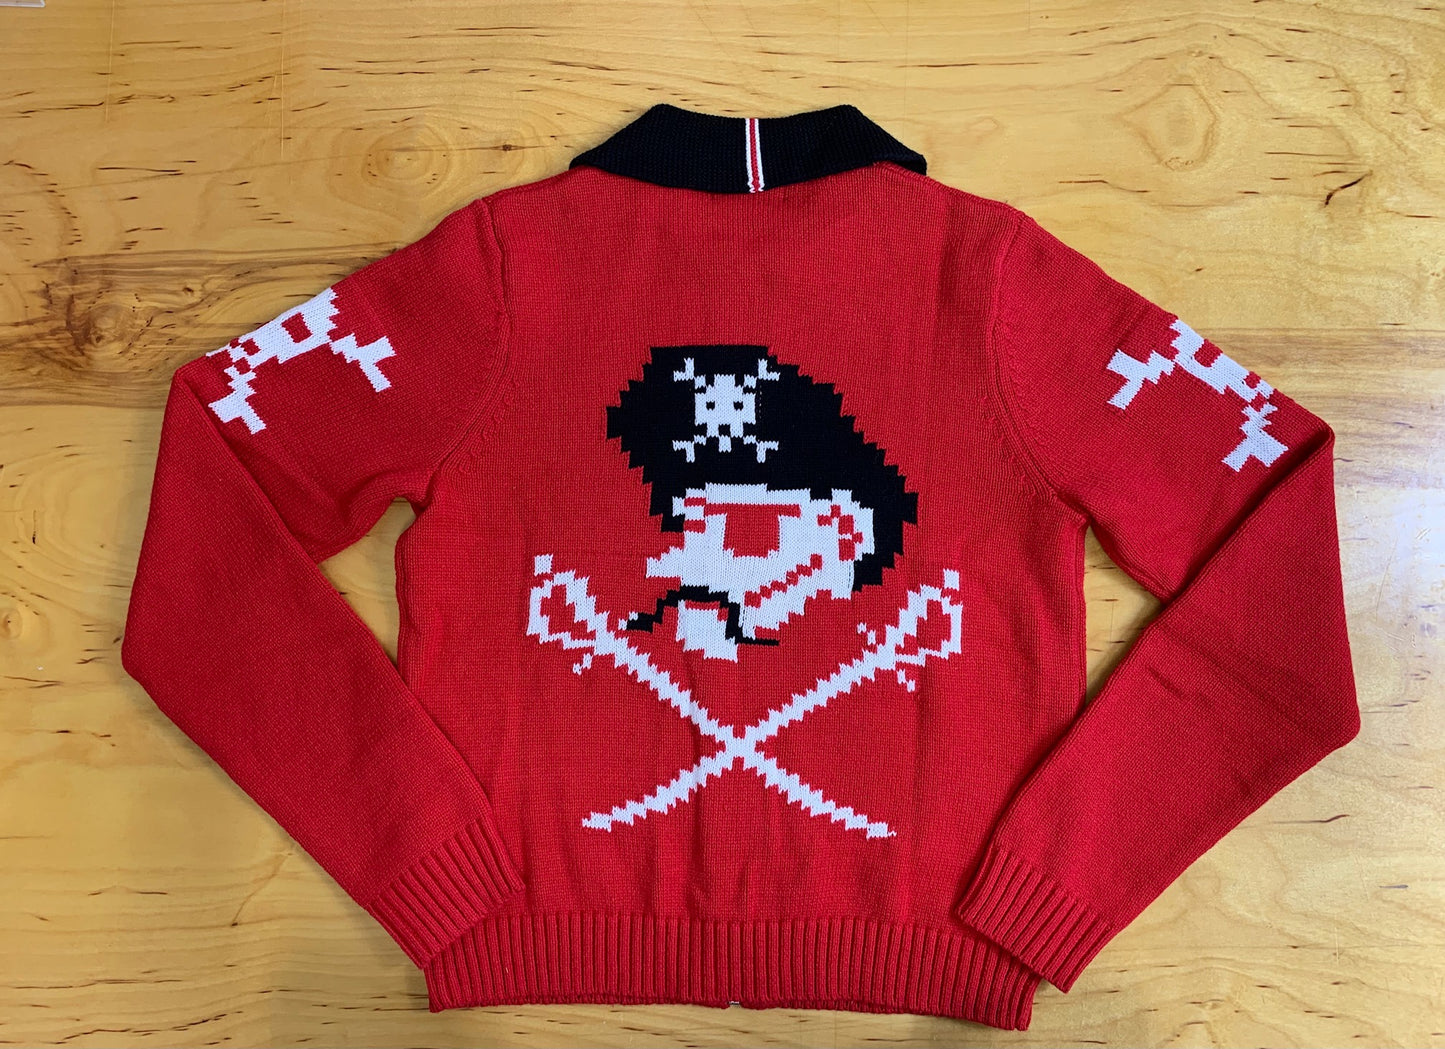 AHOY 1950's Pirate and Skulls Sweater-Red